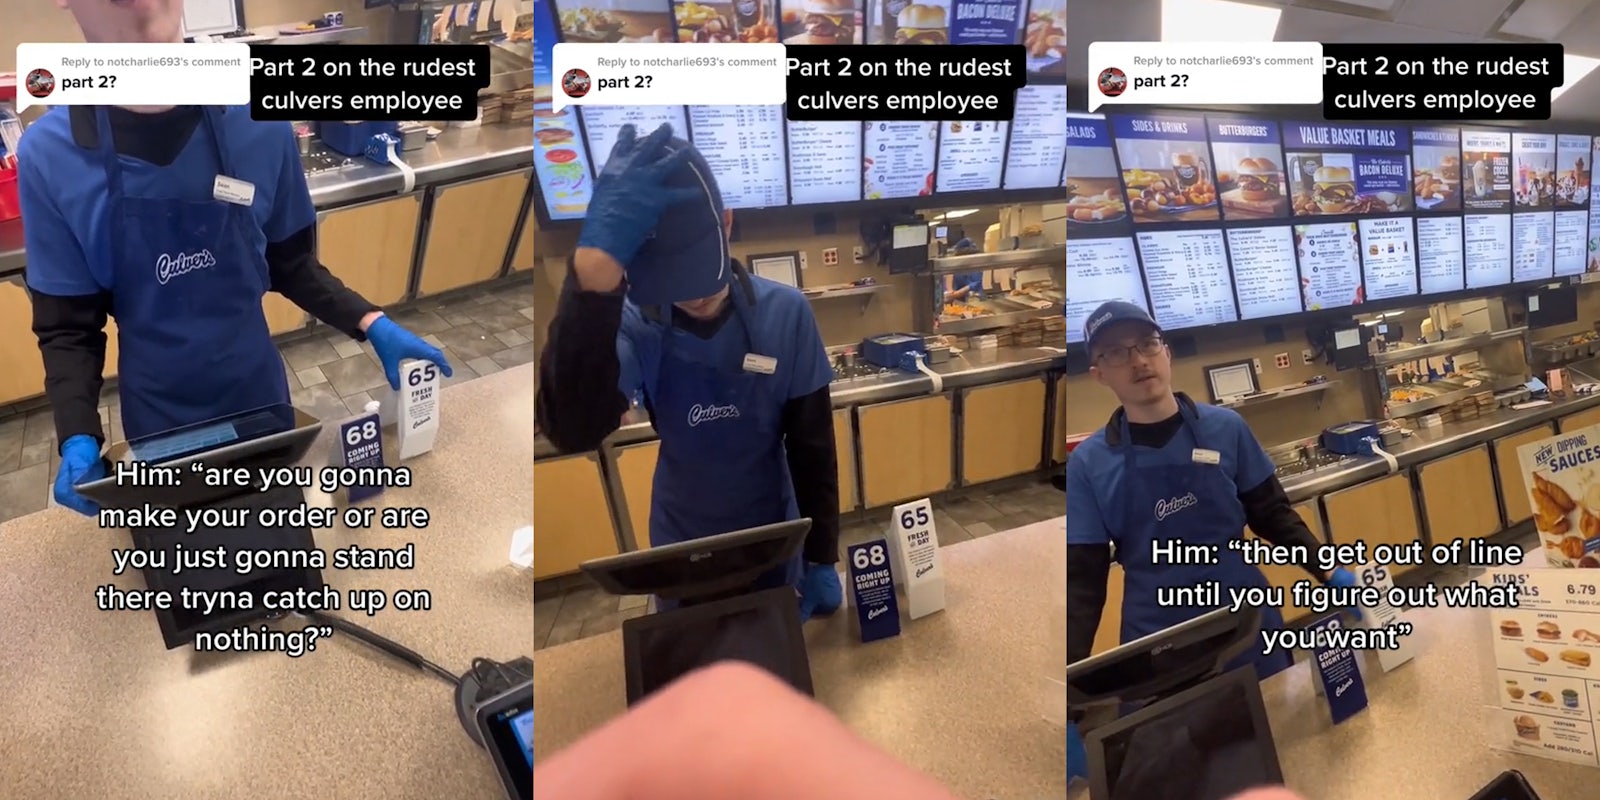 Culver's employee speaking to customer at counter caption 'Part 2 on the rudest culvers employee part 2?' 'Him: 'are you gonna make your order or are you just gonna stand there tryna catch up on nothing?' (l) Culver's employee with hand on hat at counter caption 'Part 2 on the rudest culvers employee part 2?' (c) Culver's employee speaking to customer at counter caption 'Part 2 on the rudest culvers employee part 2?' 'Him: 'then get out of line until you figure out what you want' (r)